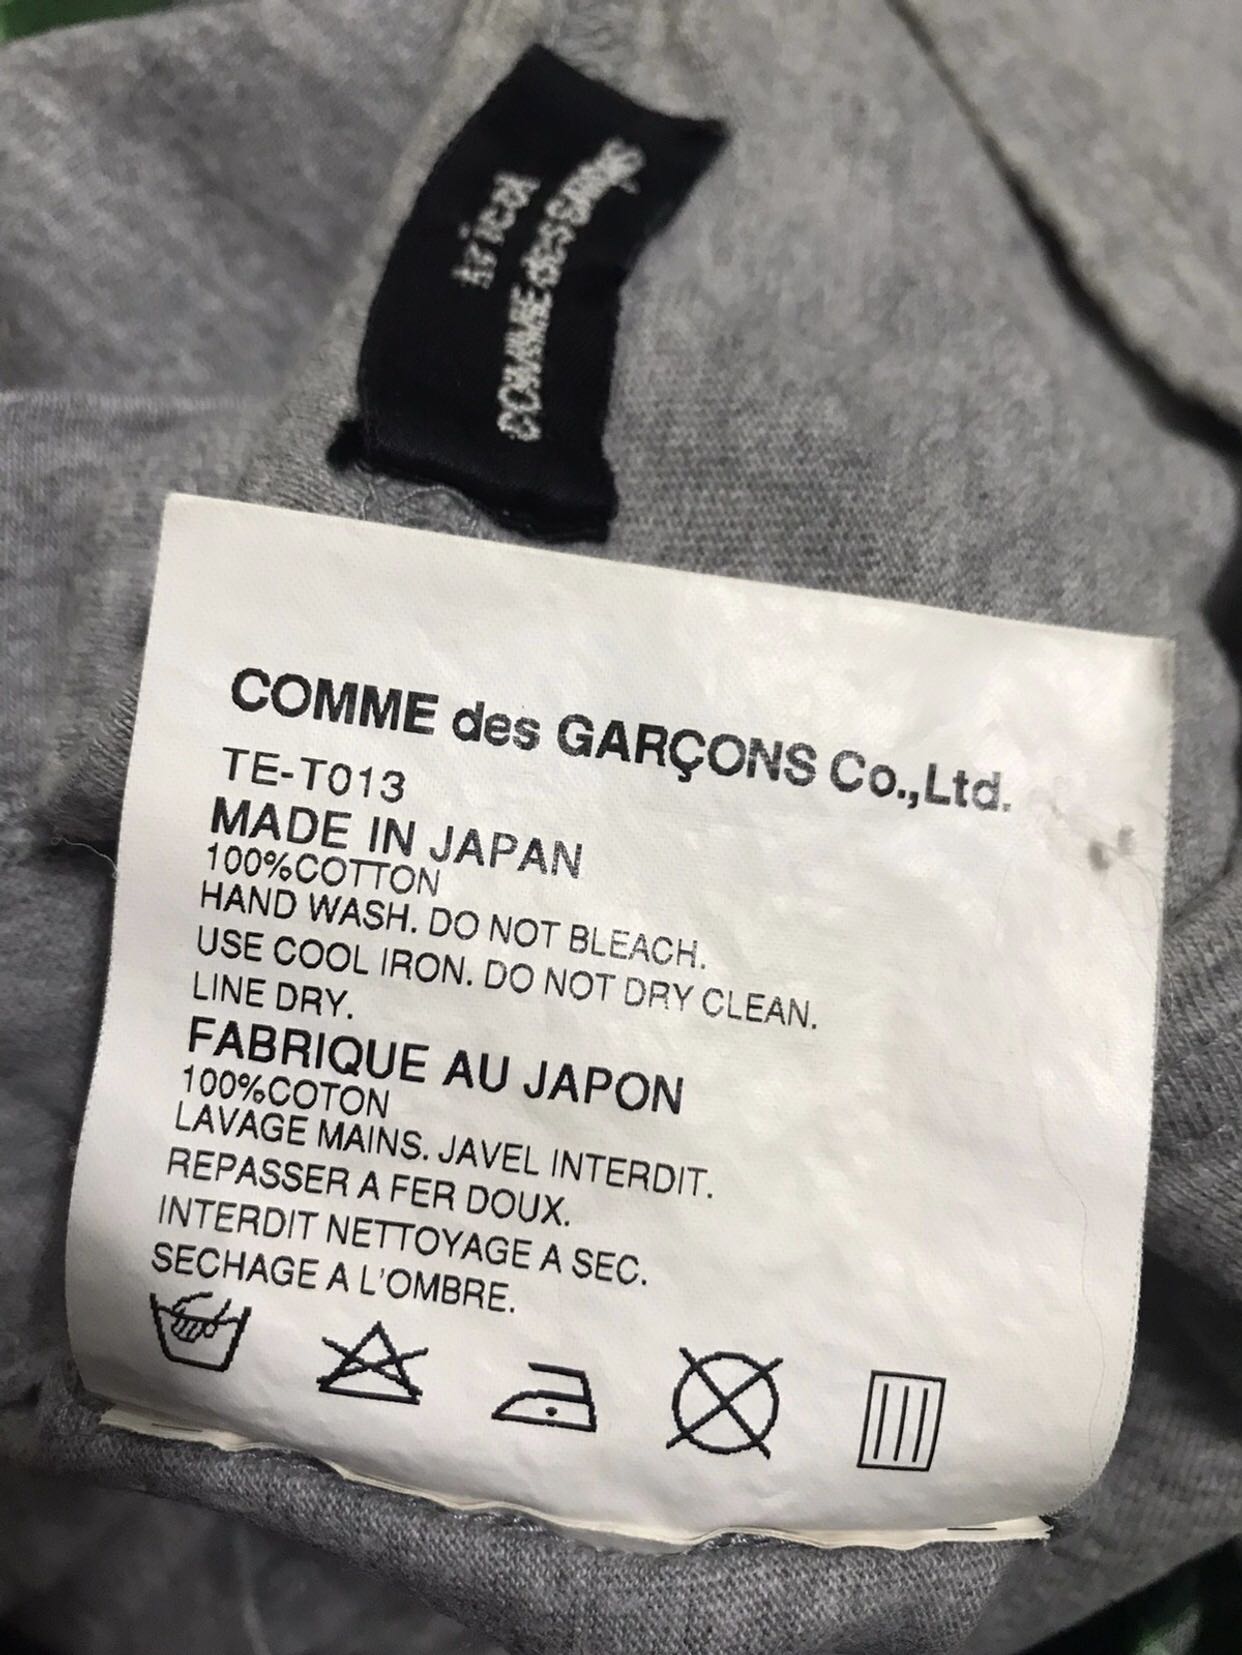 🔥 2001 Comme des garcons tricot sleeveless glitter gold logo - 6